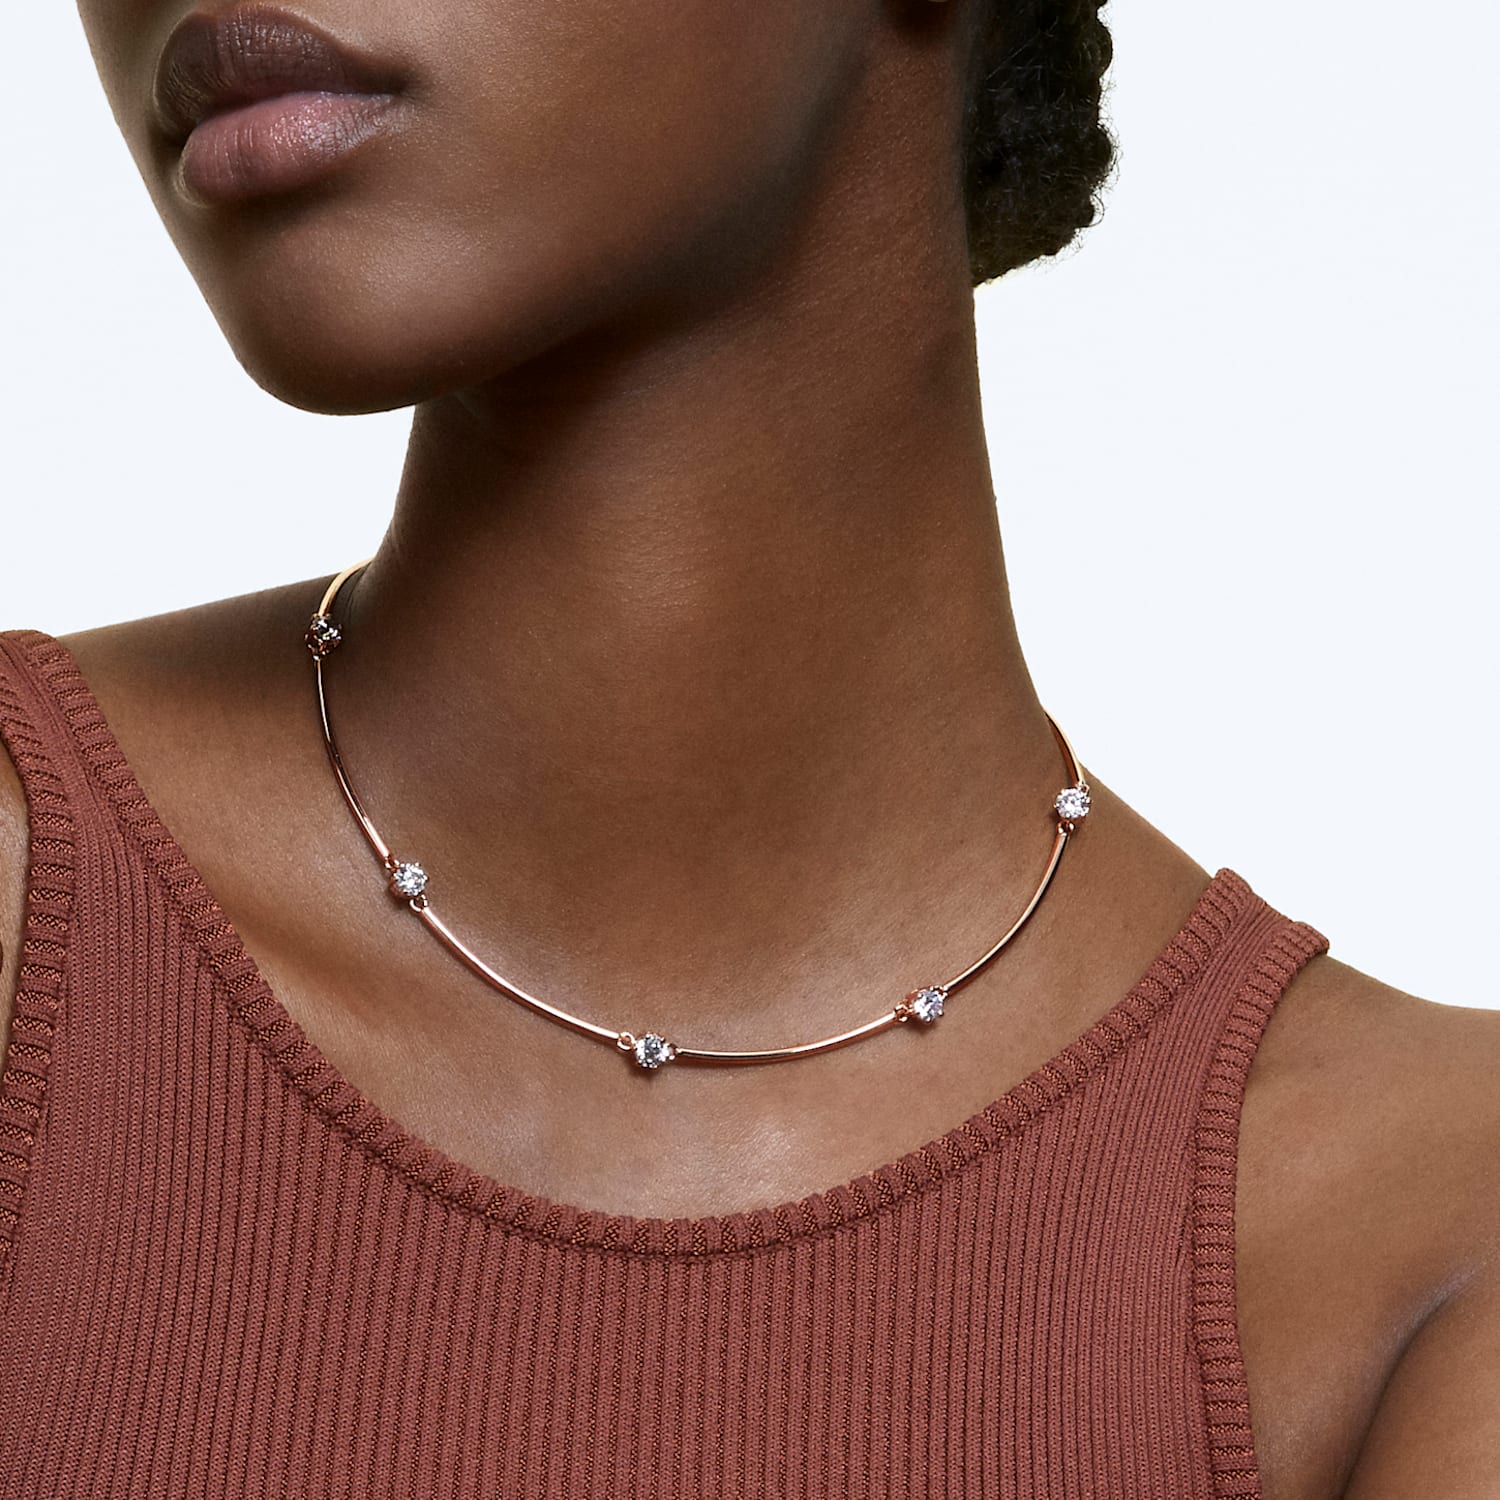 Constella necklace, Round cut, White, Rose gold-tone plated